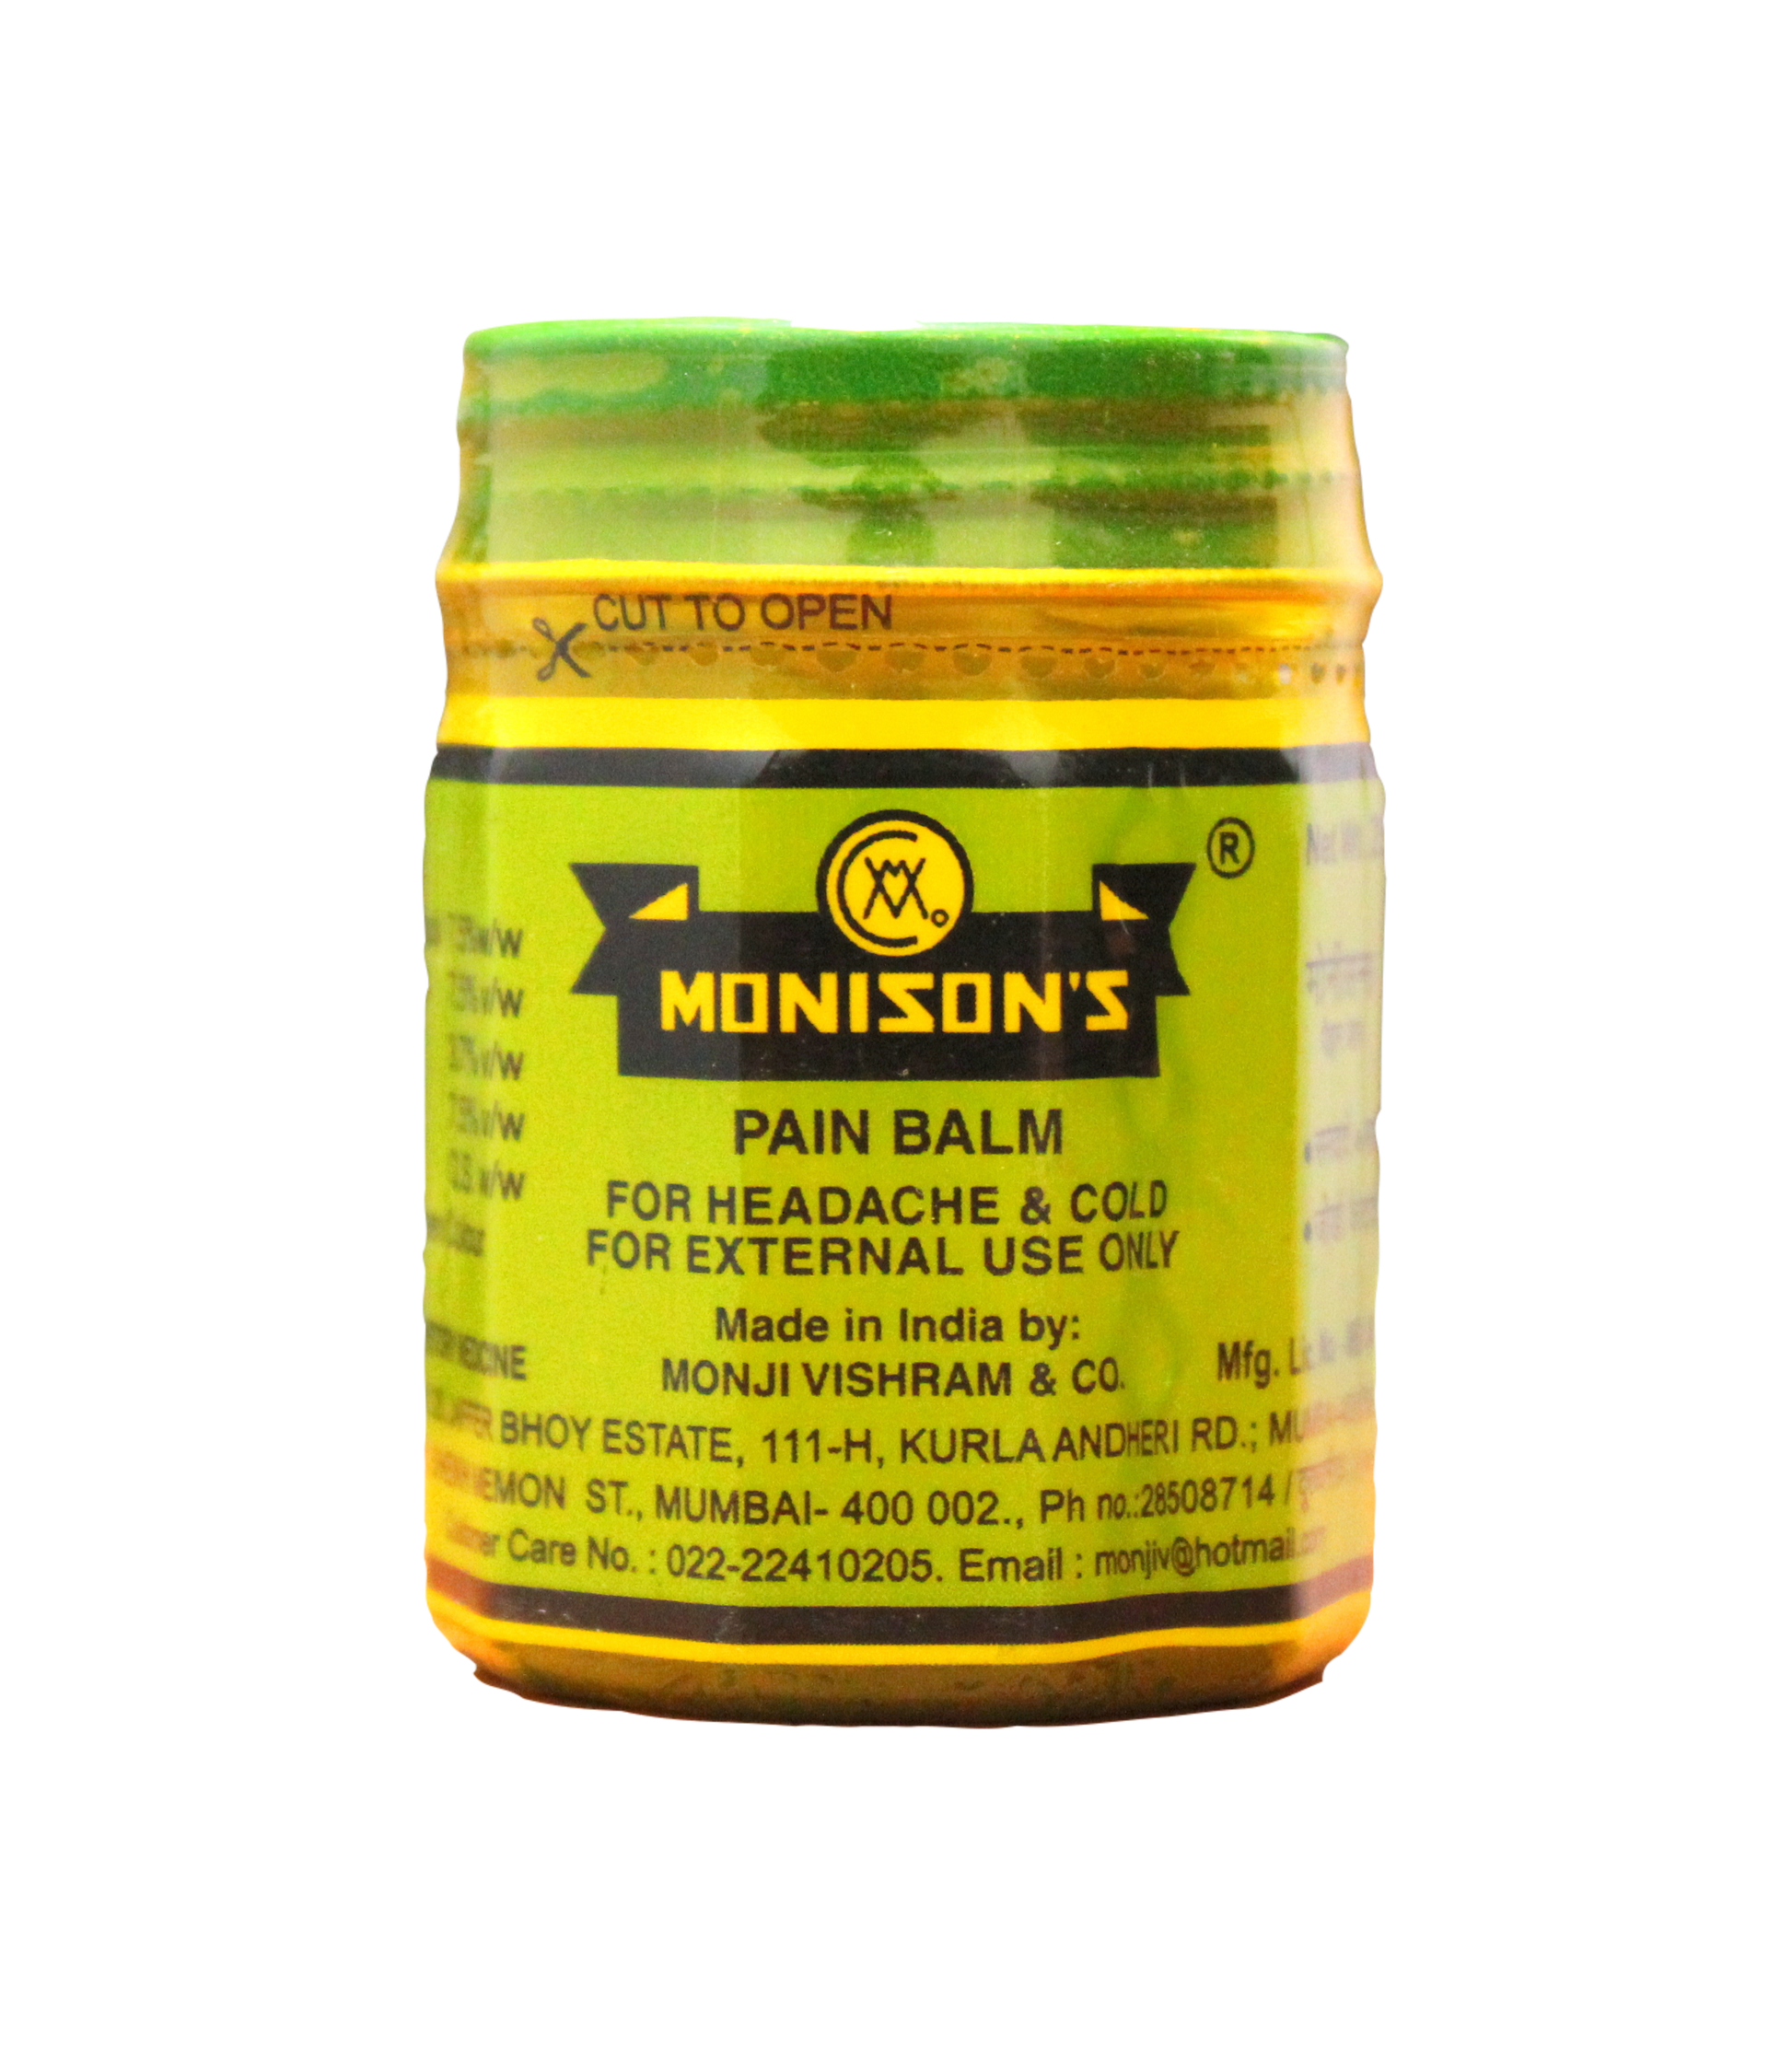 Shop Monison pain balm 45gm at price 72.00 from Monison Online - Ayush Care